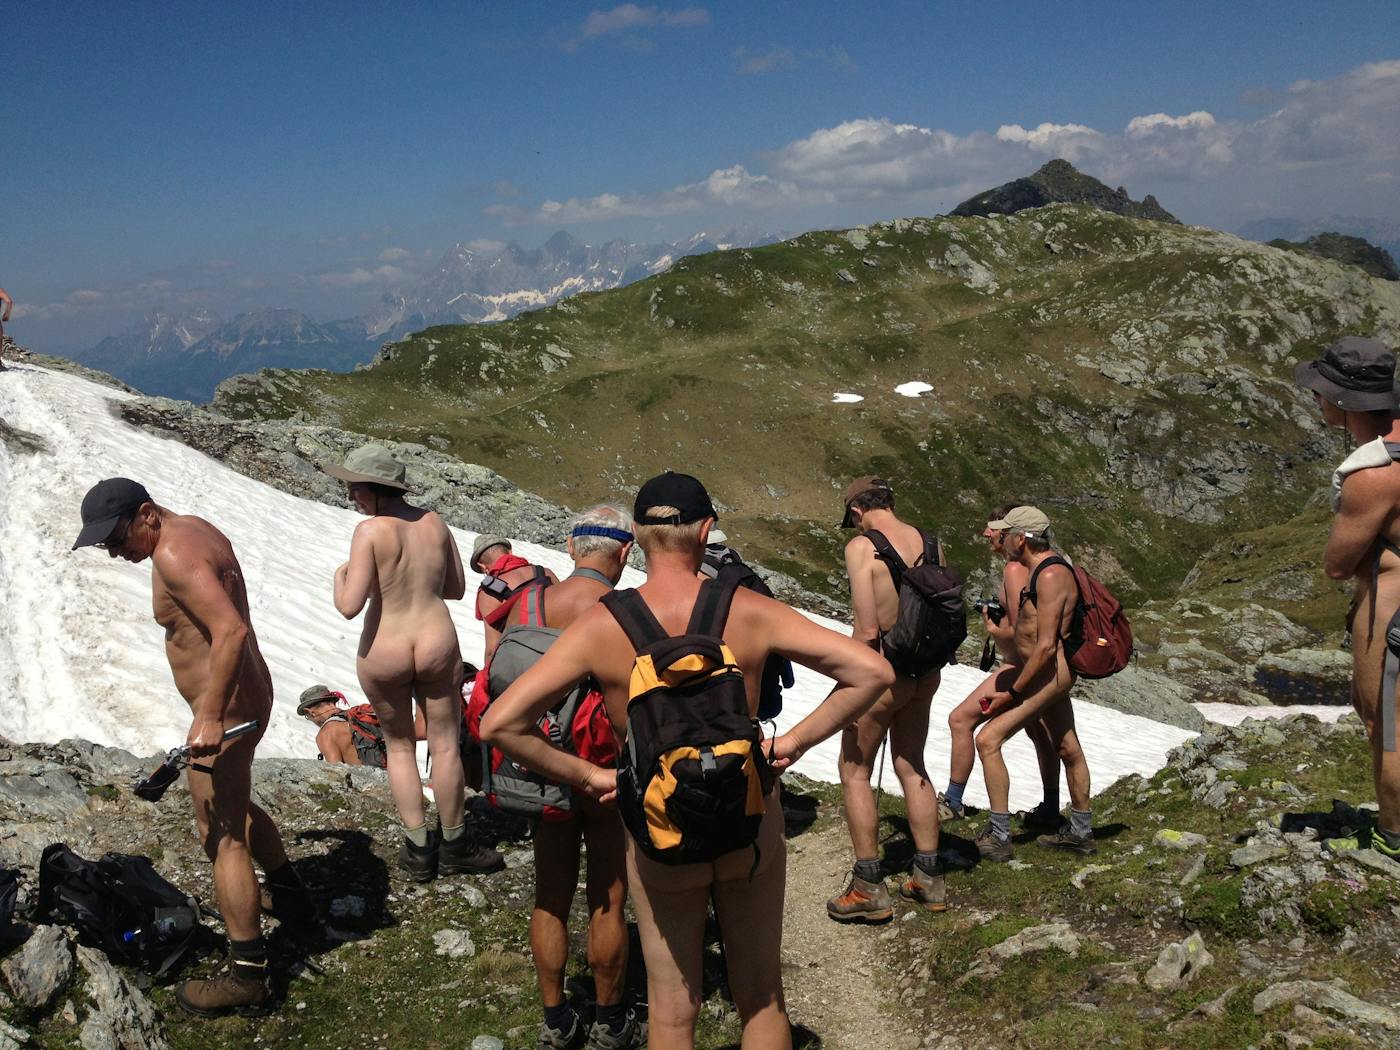 Europe Nudist Resorts - When Will We Accept Nudity? | Inverse